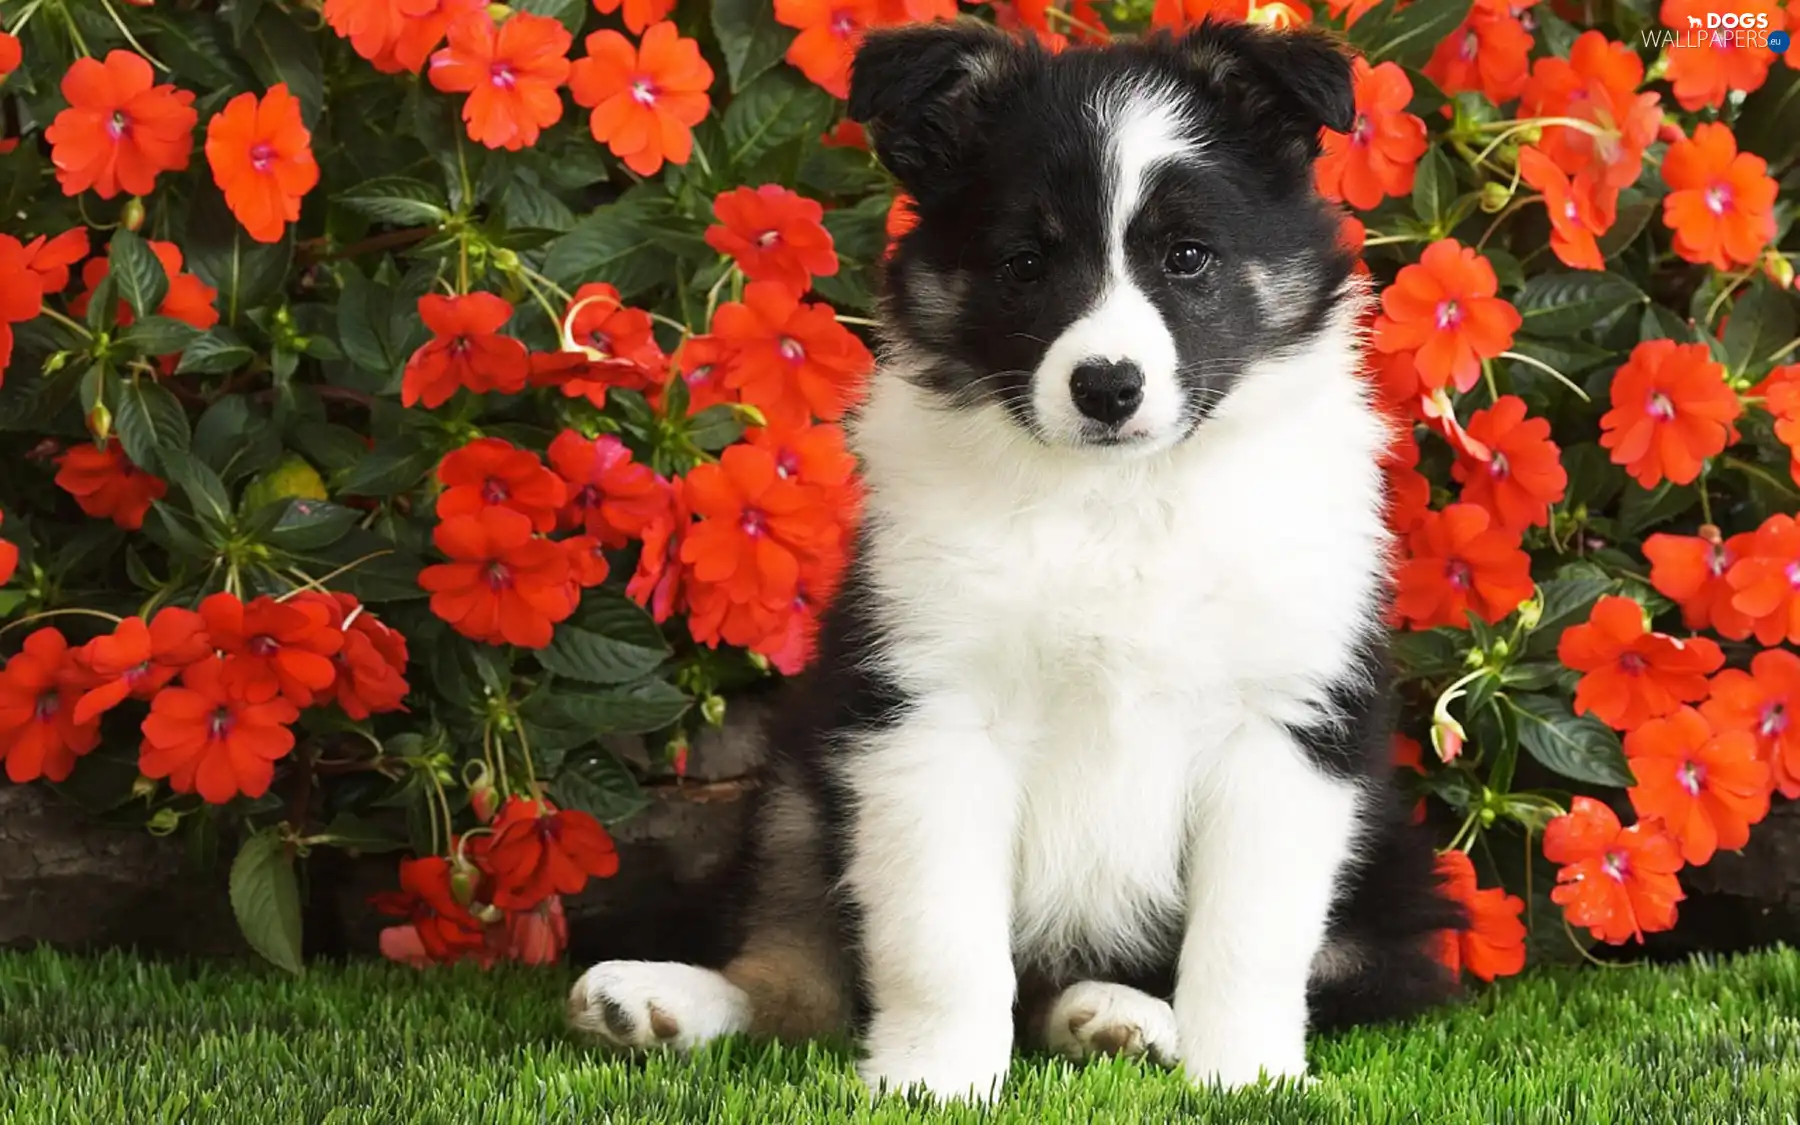 Flowers, Red, doggy, Border Collie